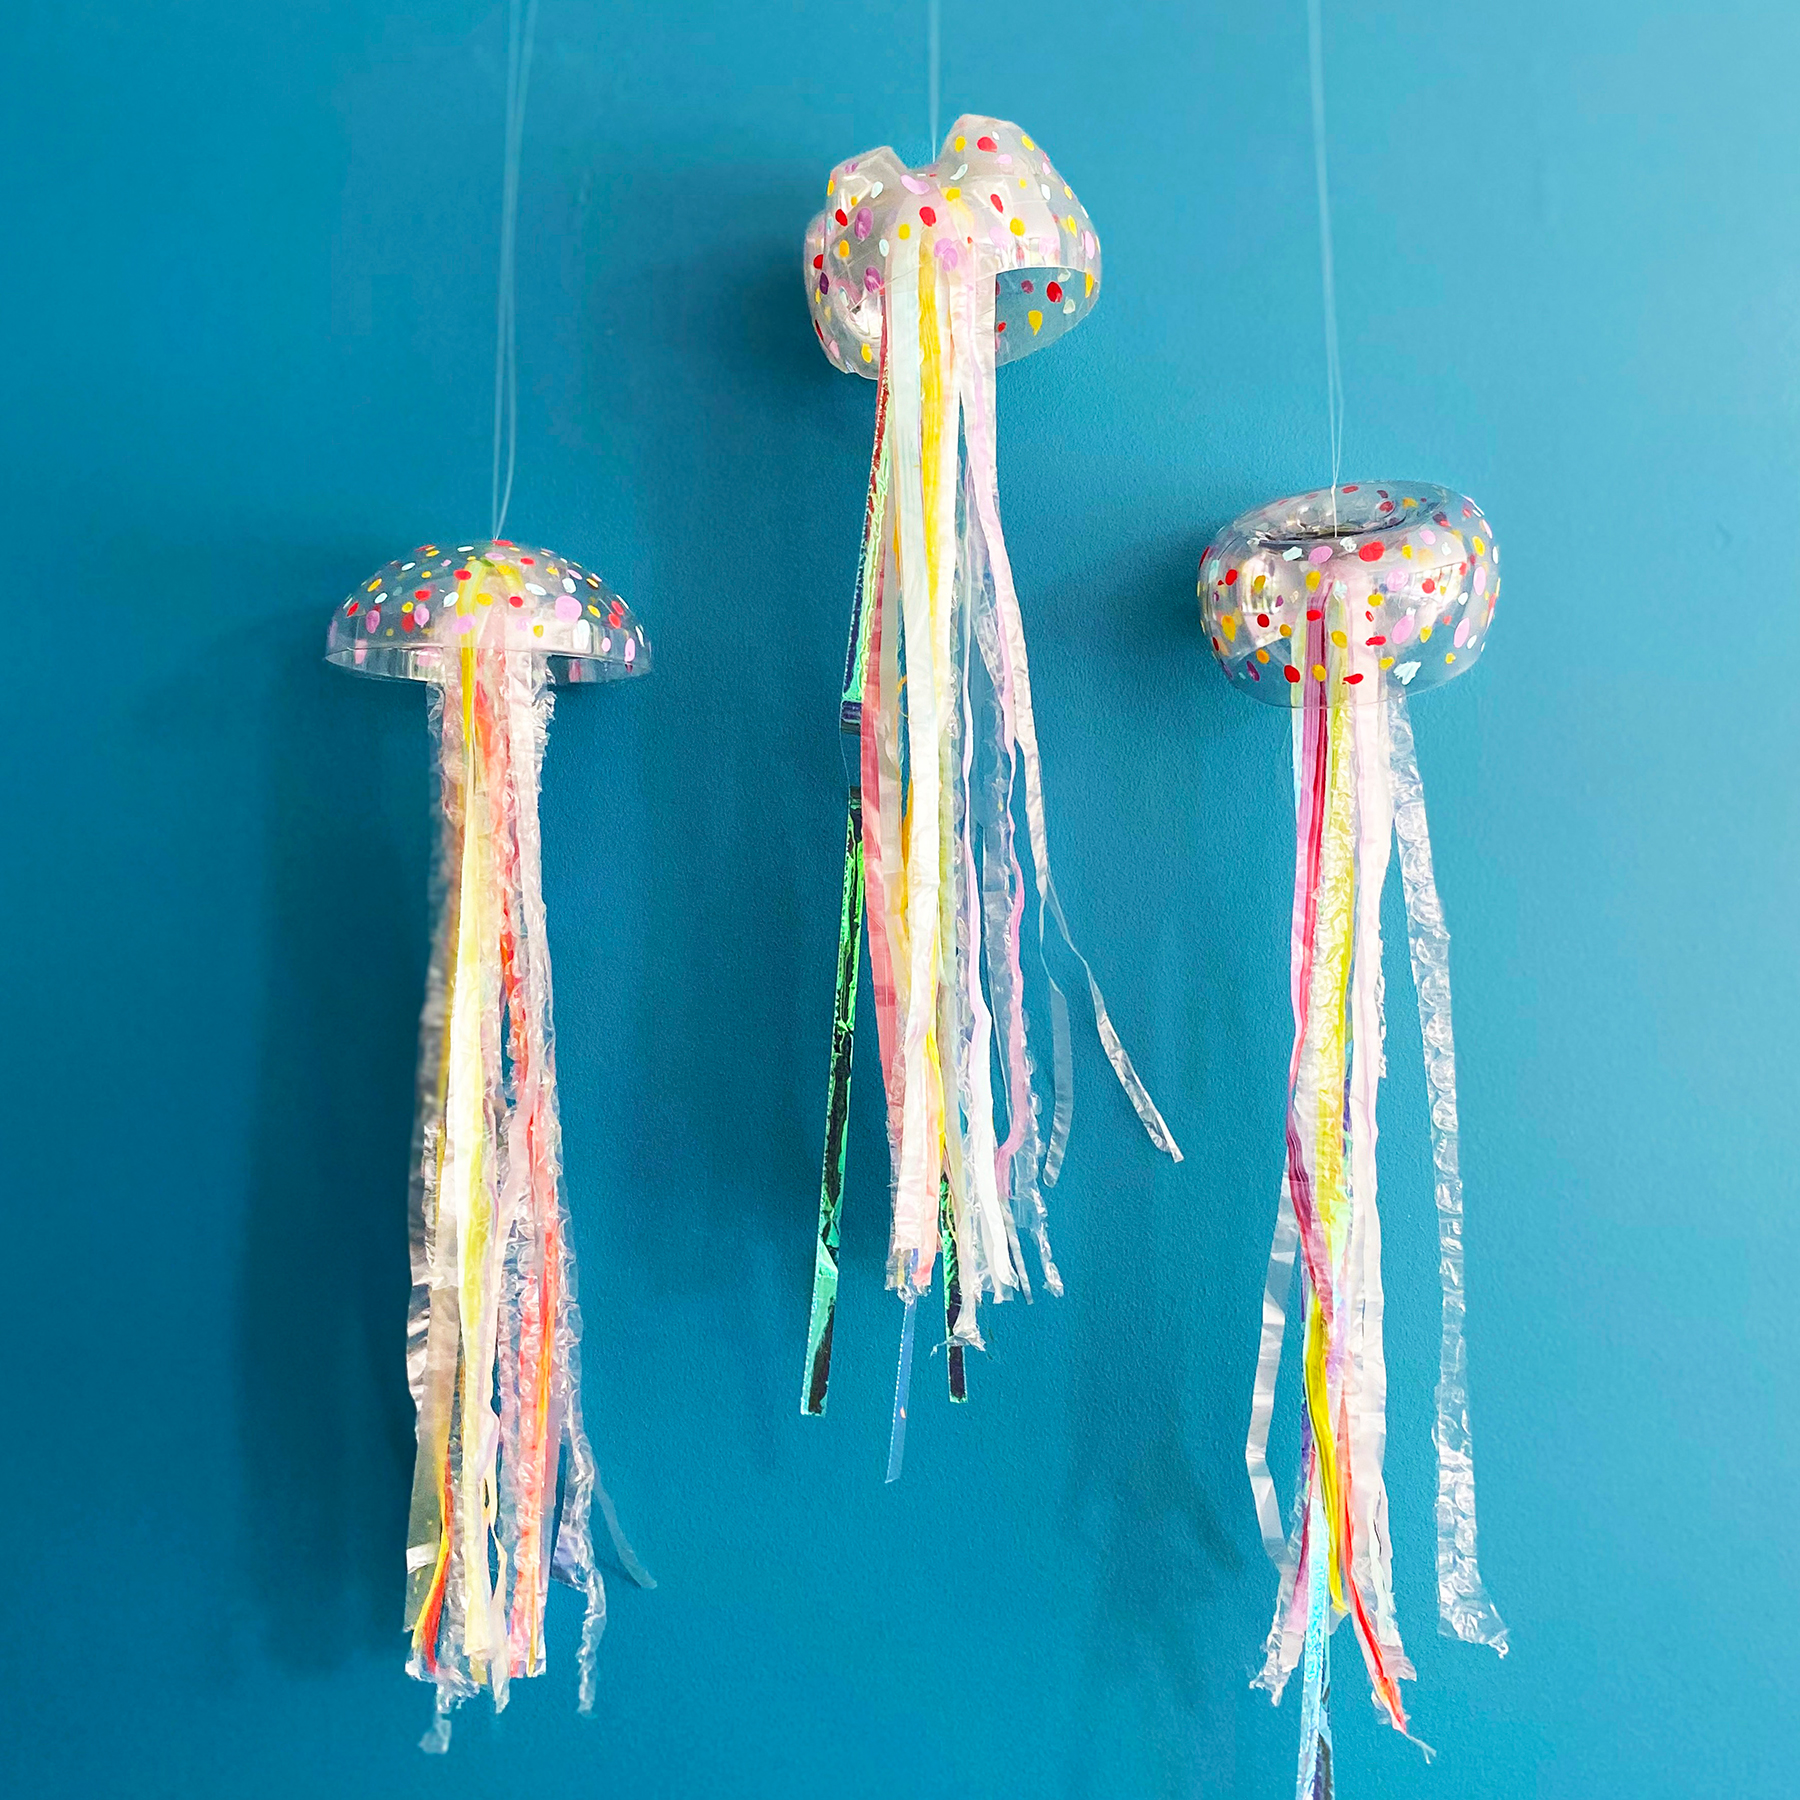 A photo of three recycled jellyfish mobiles hanging up against a blue background